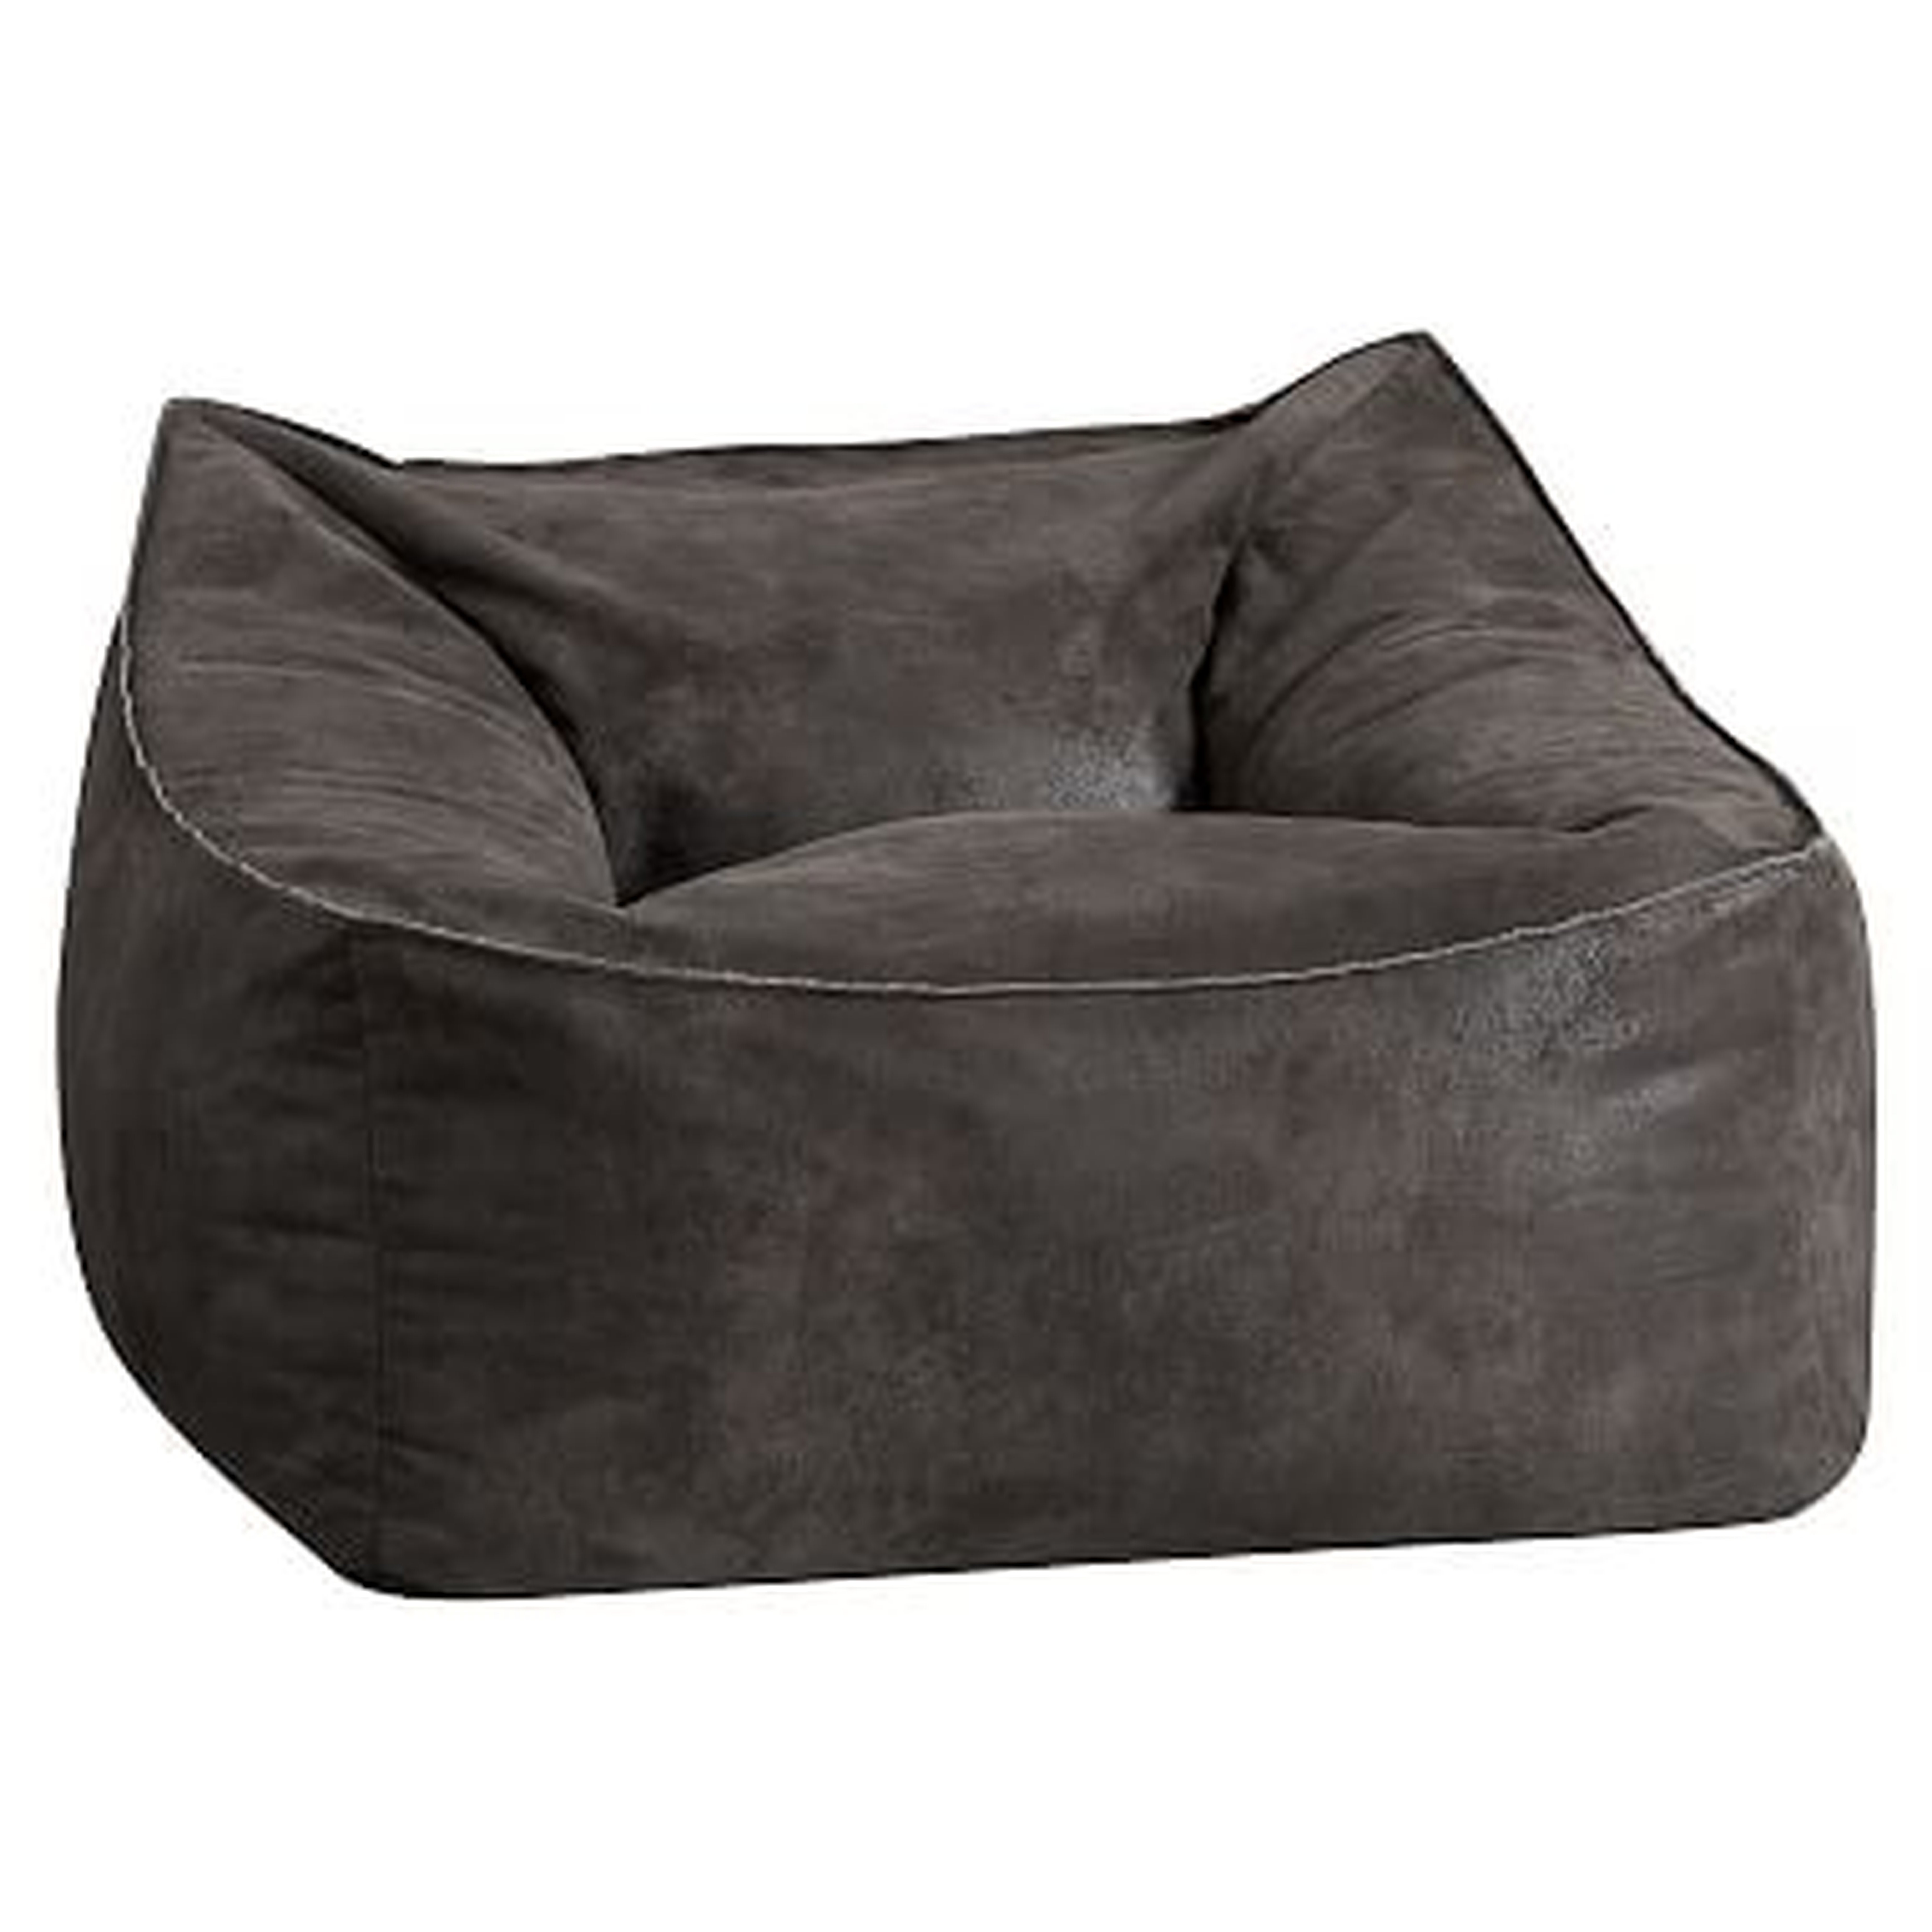 Textured Faux Suede Charcoal/Dark Gray Modern Lounger - Pottery Barn Teen